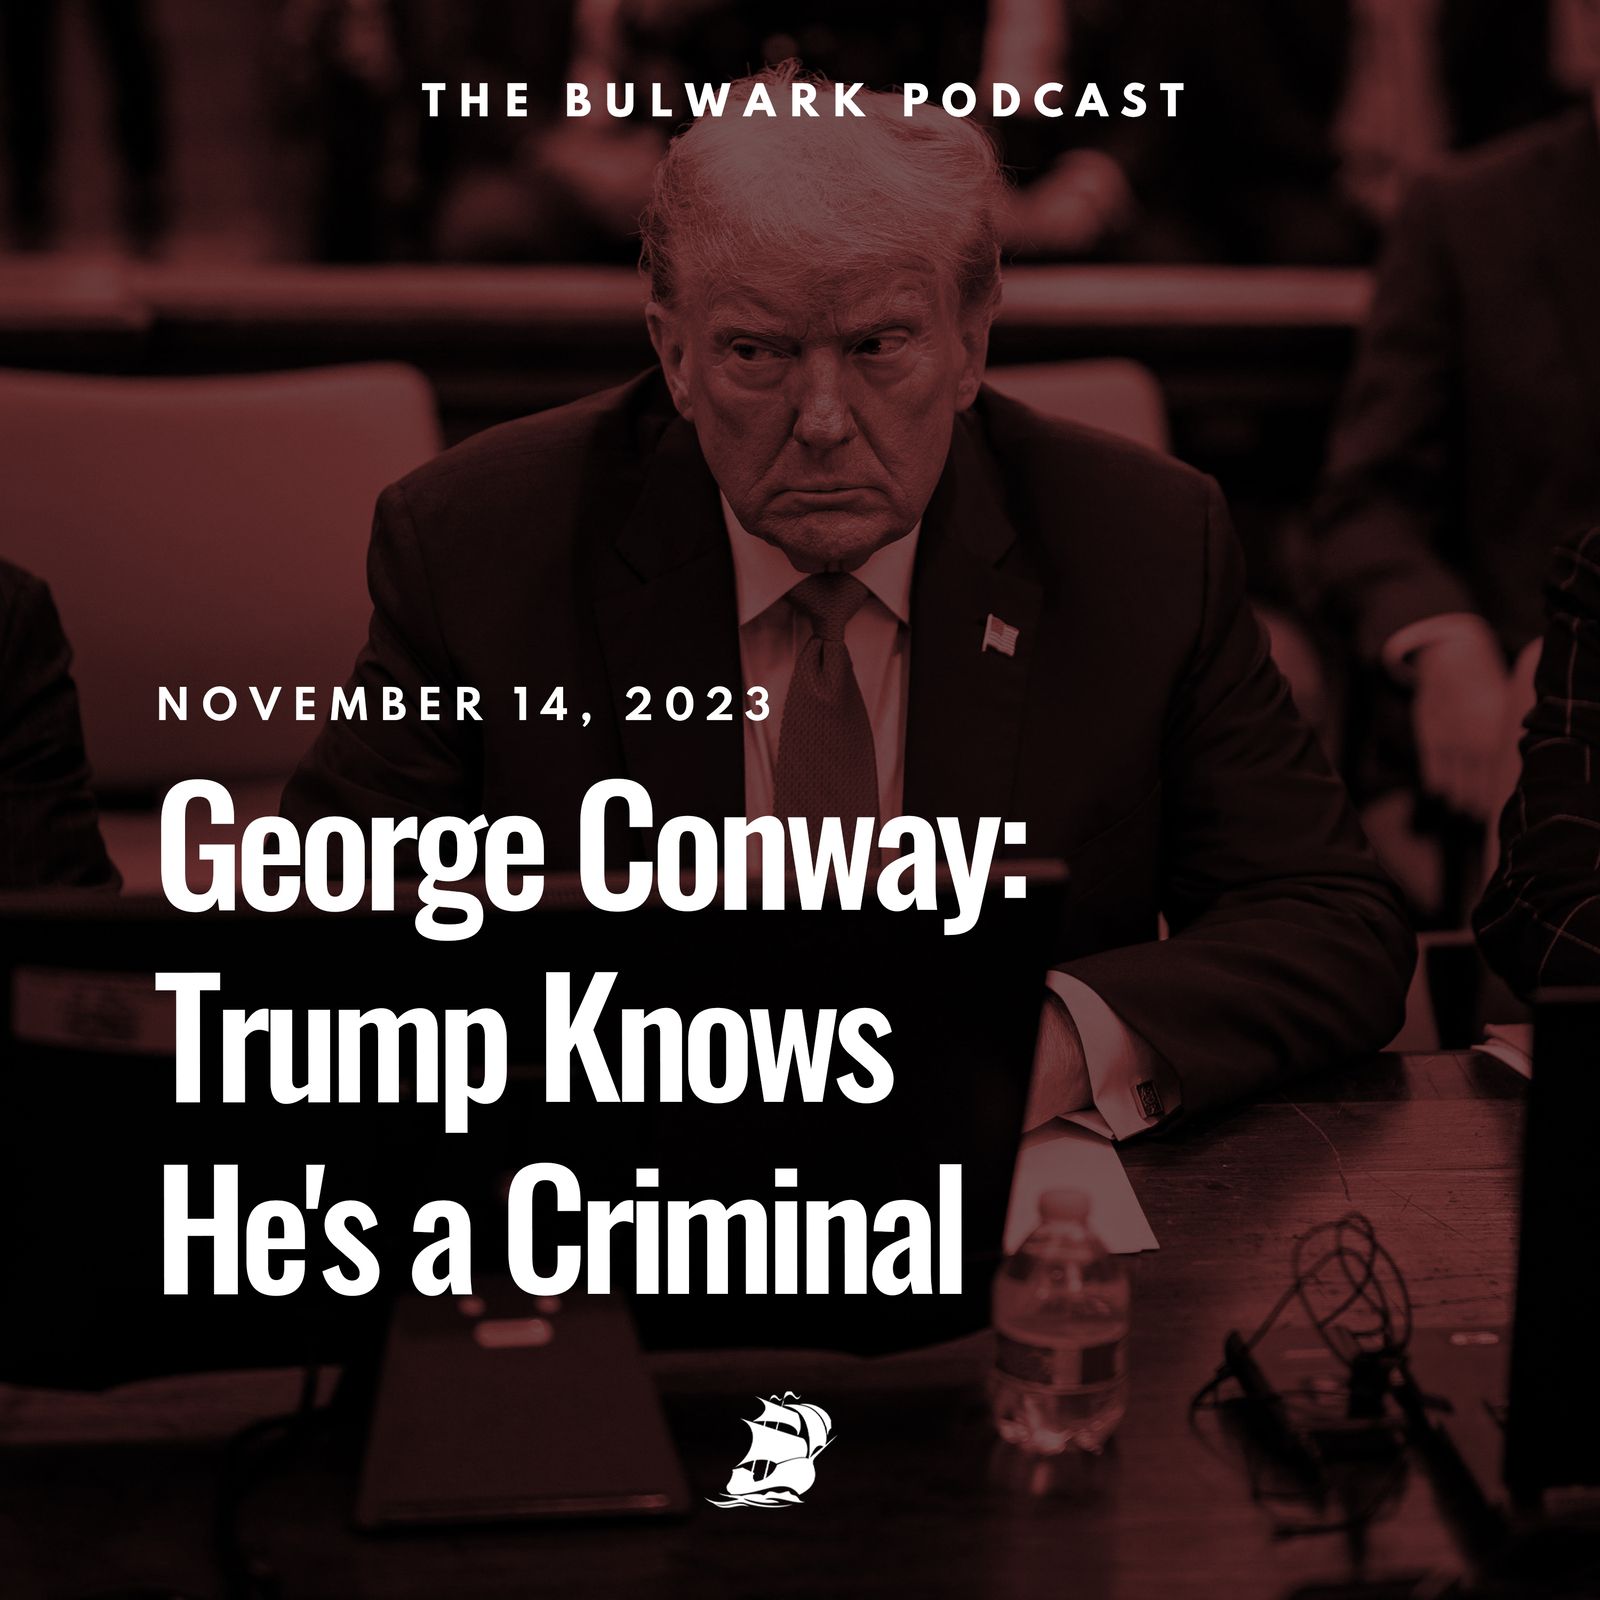 George Conway: Trump Knows He's a Criminal